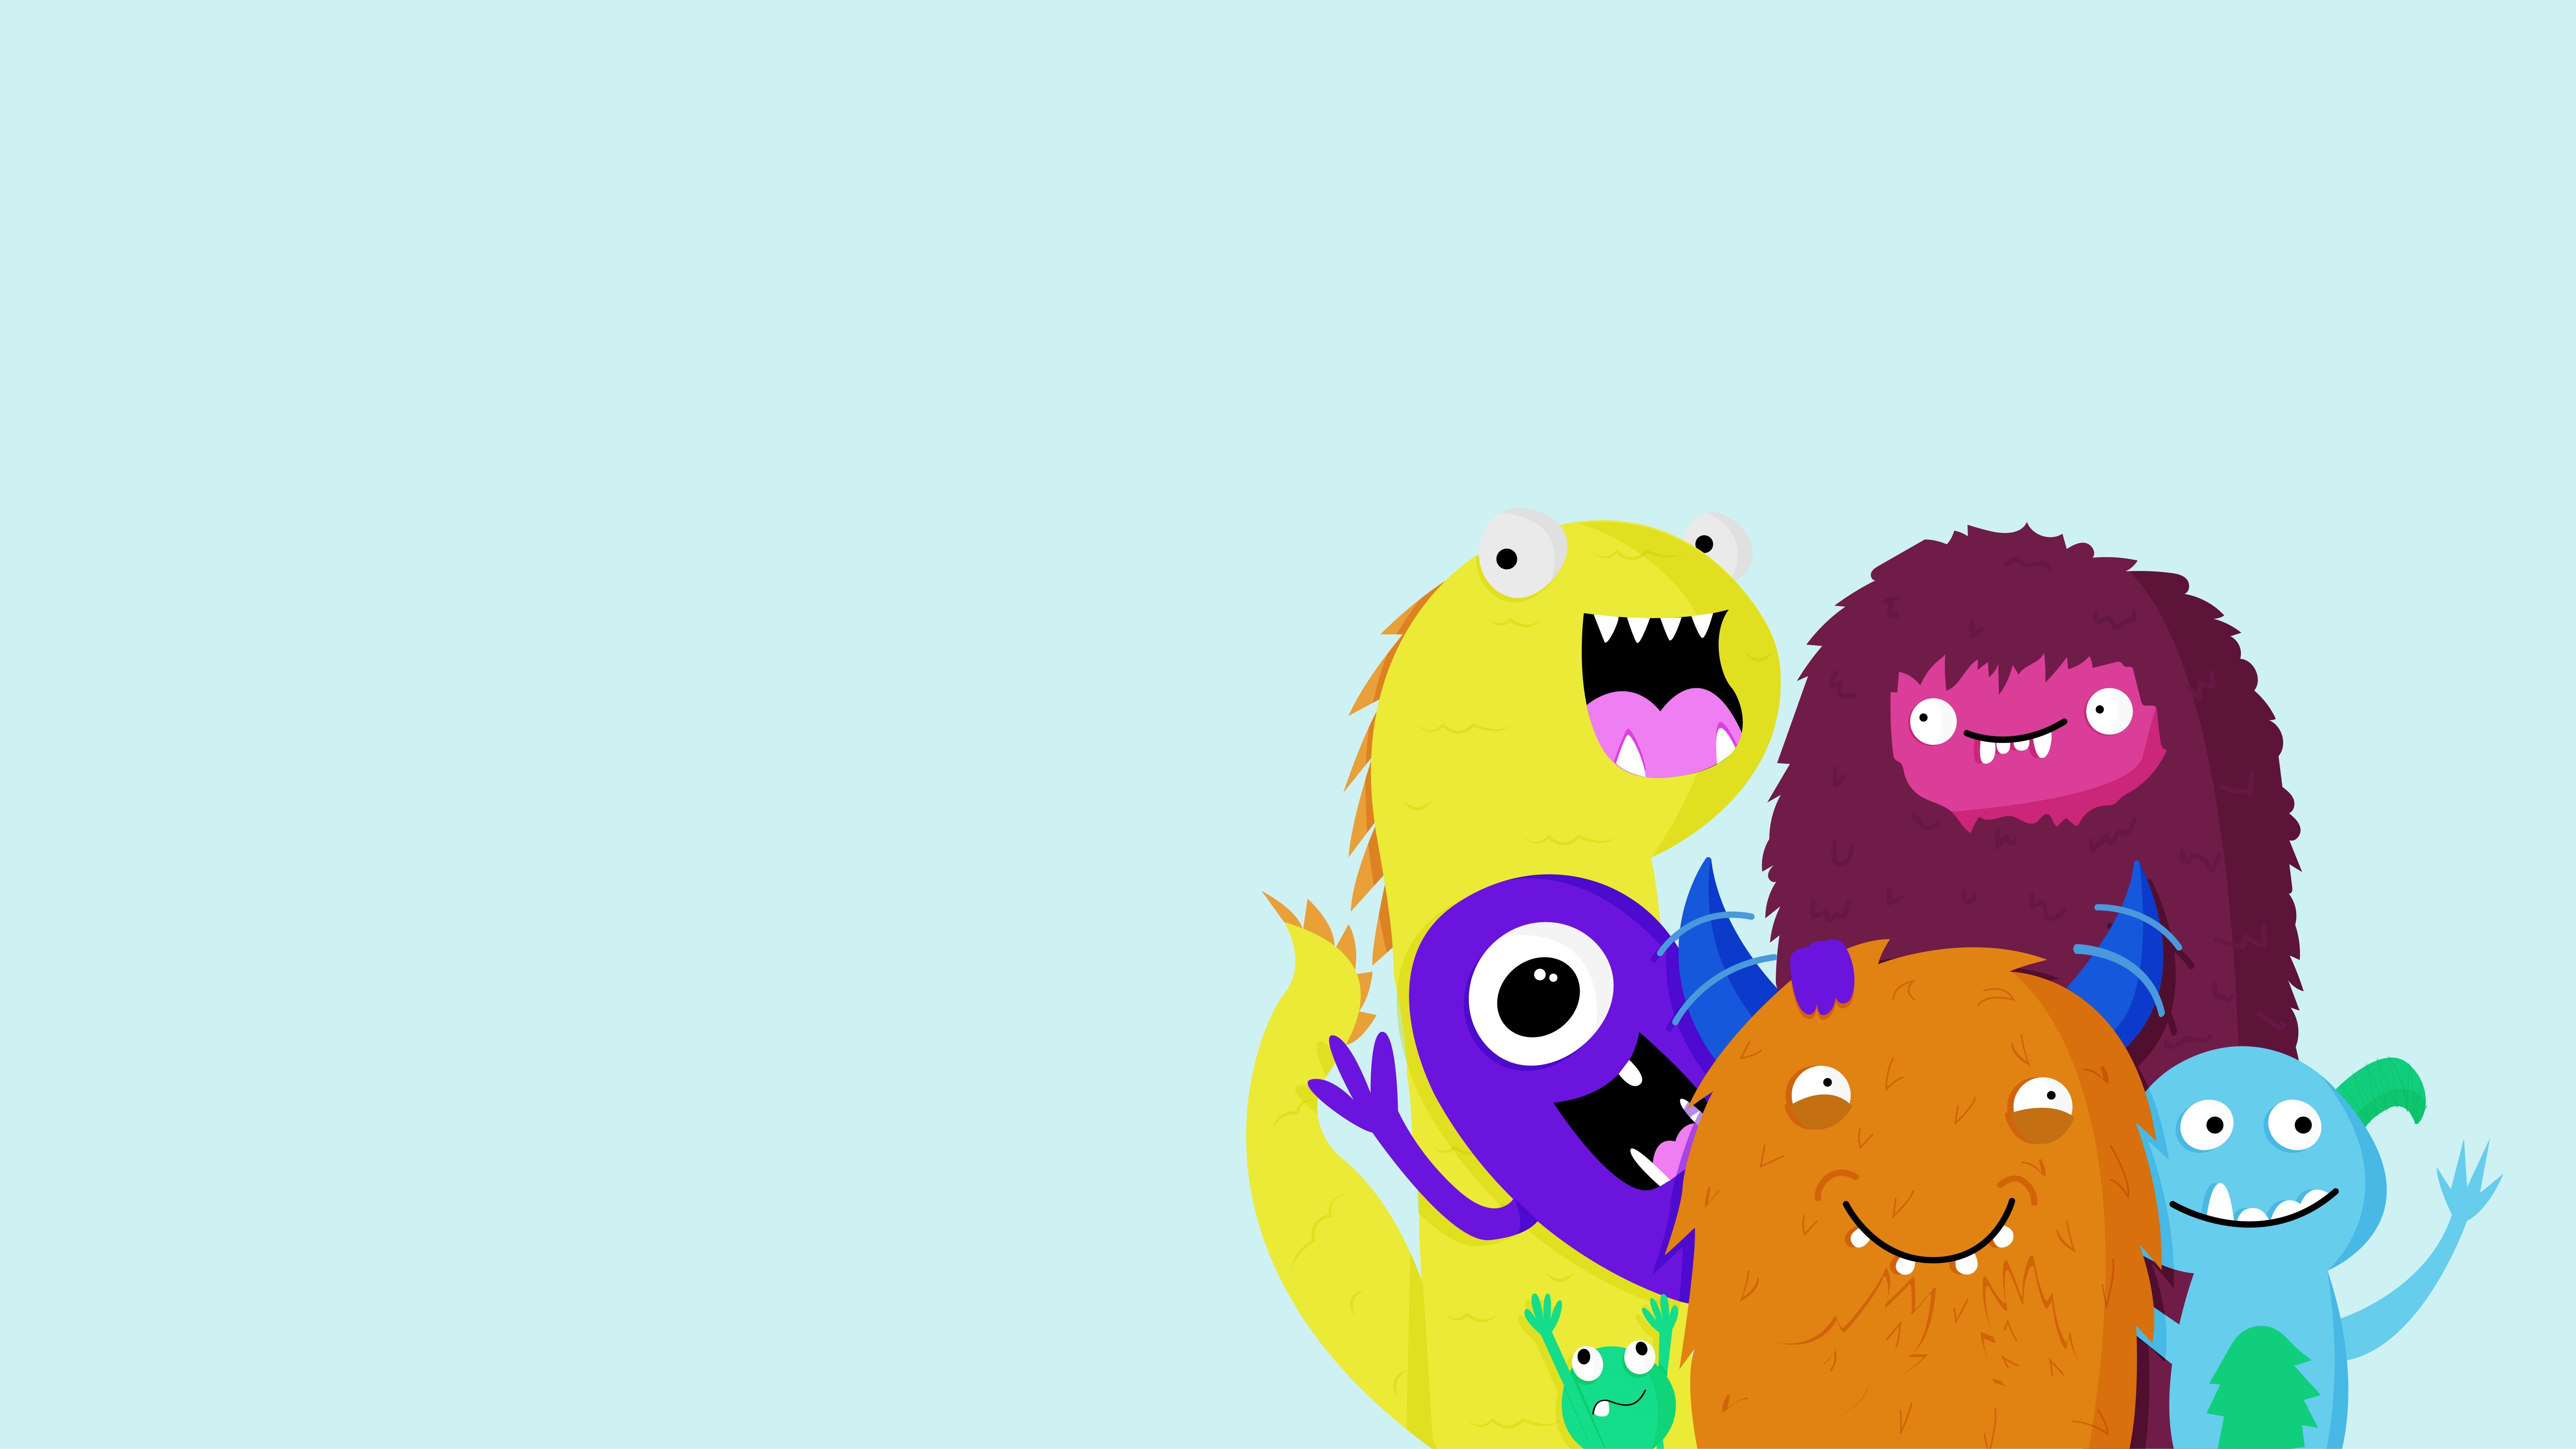 I Thought You Guys Would Enjoy This Cute Monster Wallpaper My Girlfriend U Brbimcrying Made! • R Wallpaper. Cute Monsters, Me As A Girlfriend, Wallpaper